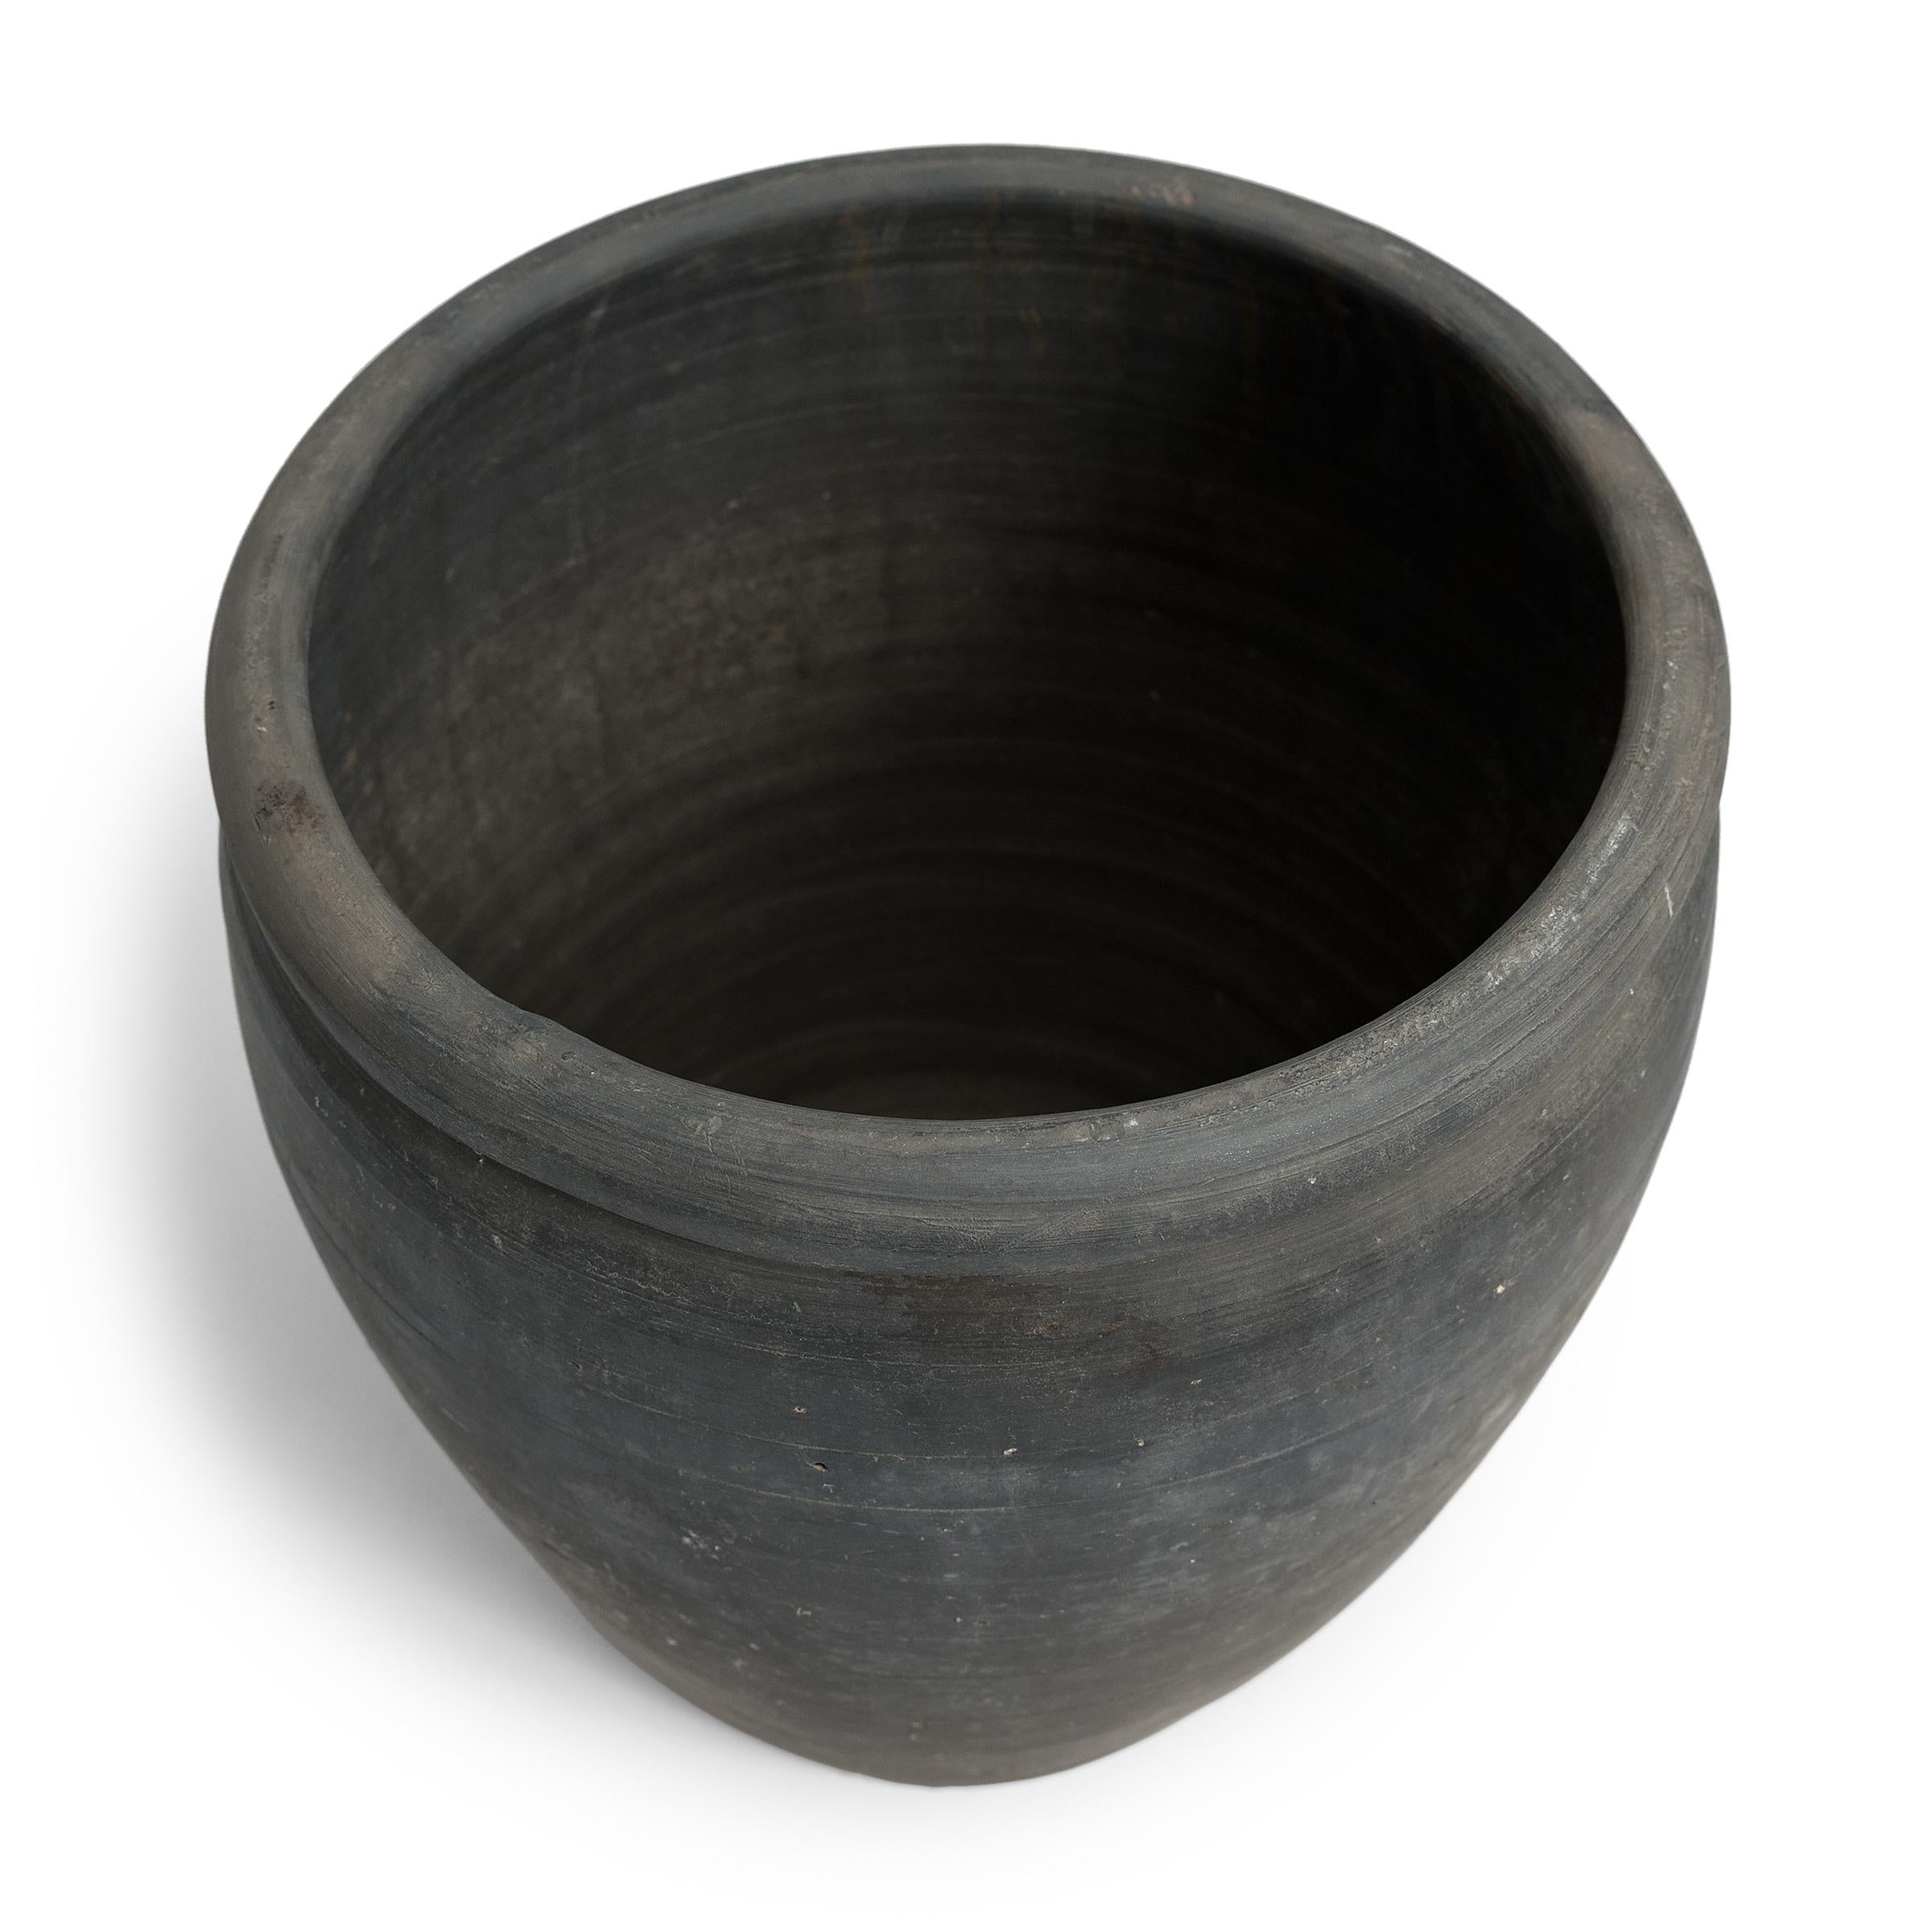 Organic Modern Chinese Black Clay Vessel, c. 1900 For Sale